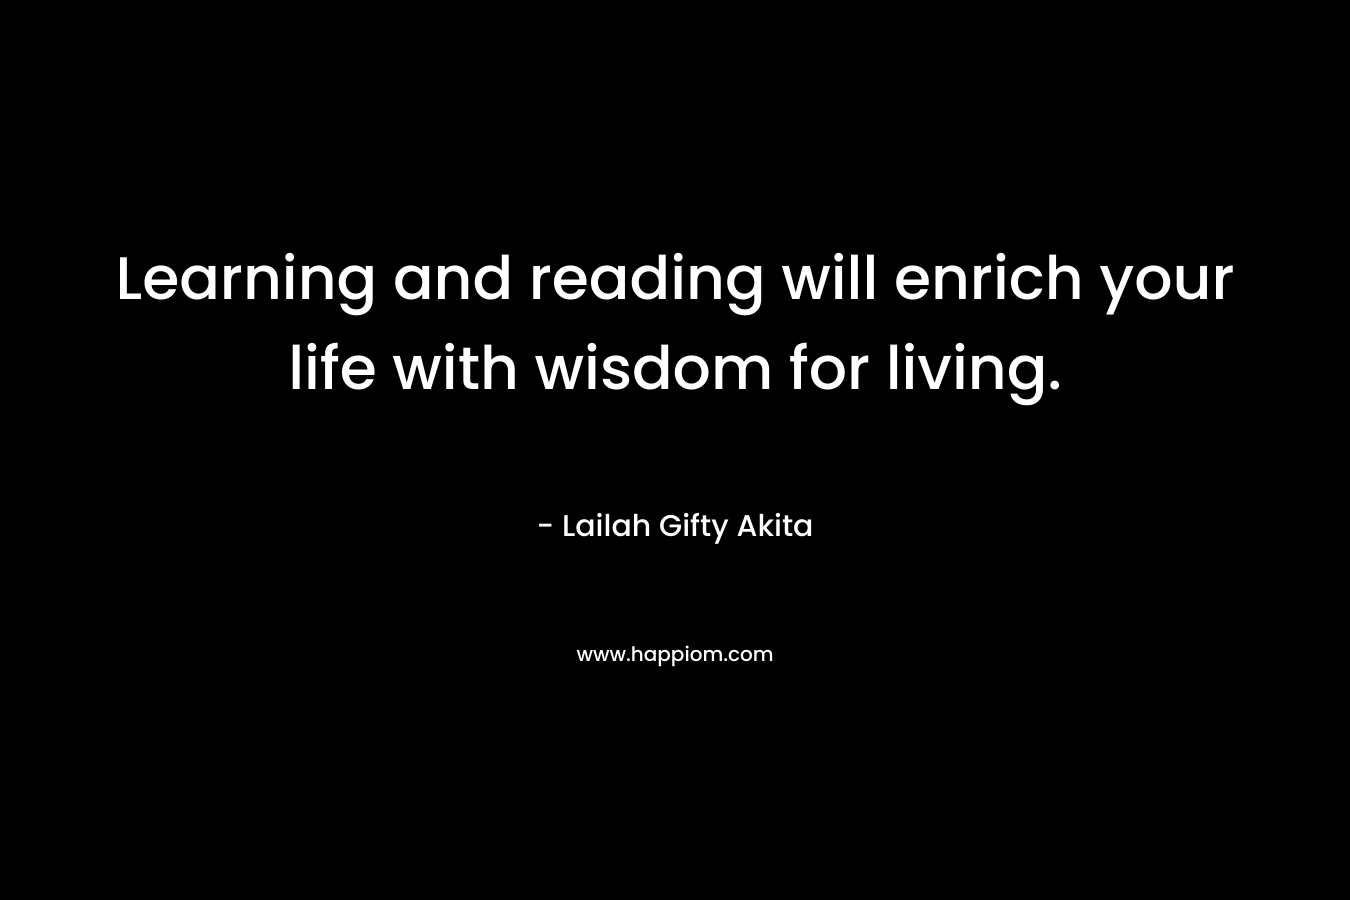 Learning and reading will enrich your life with wisdom for living. – Lailah Gifty Akita